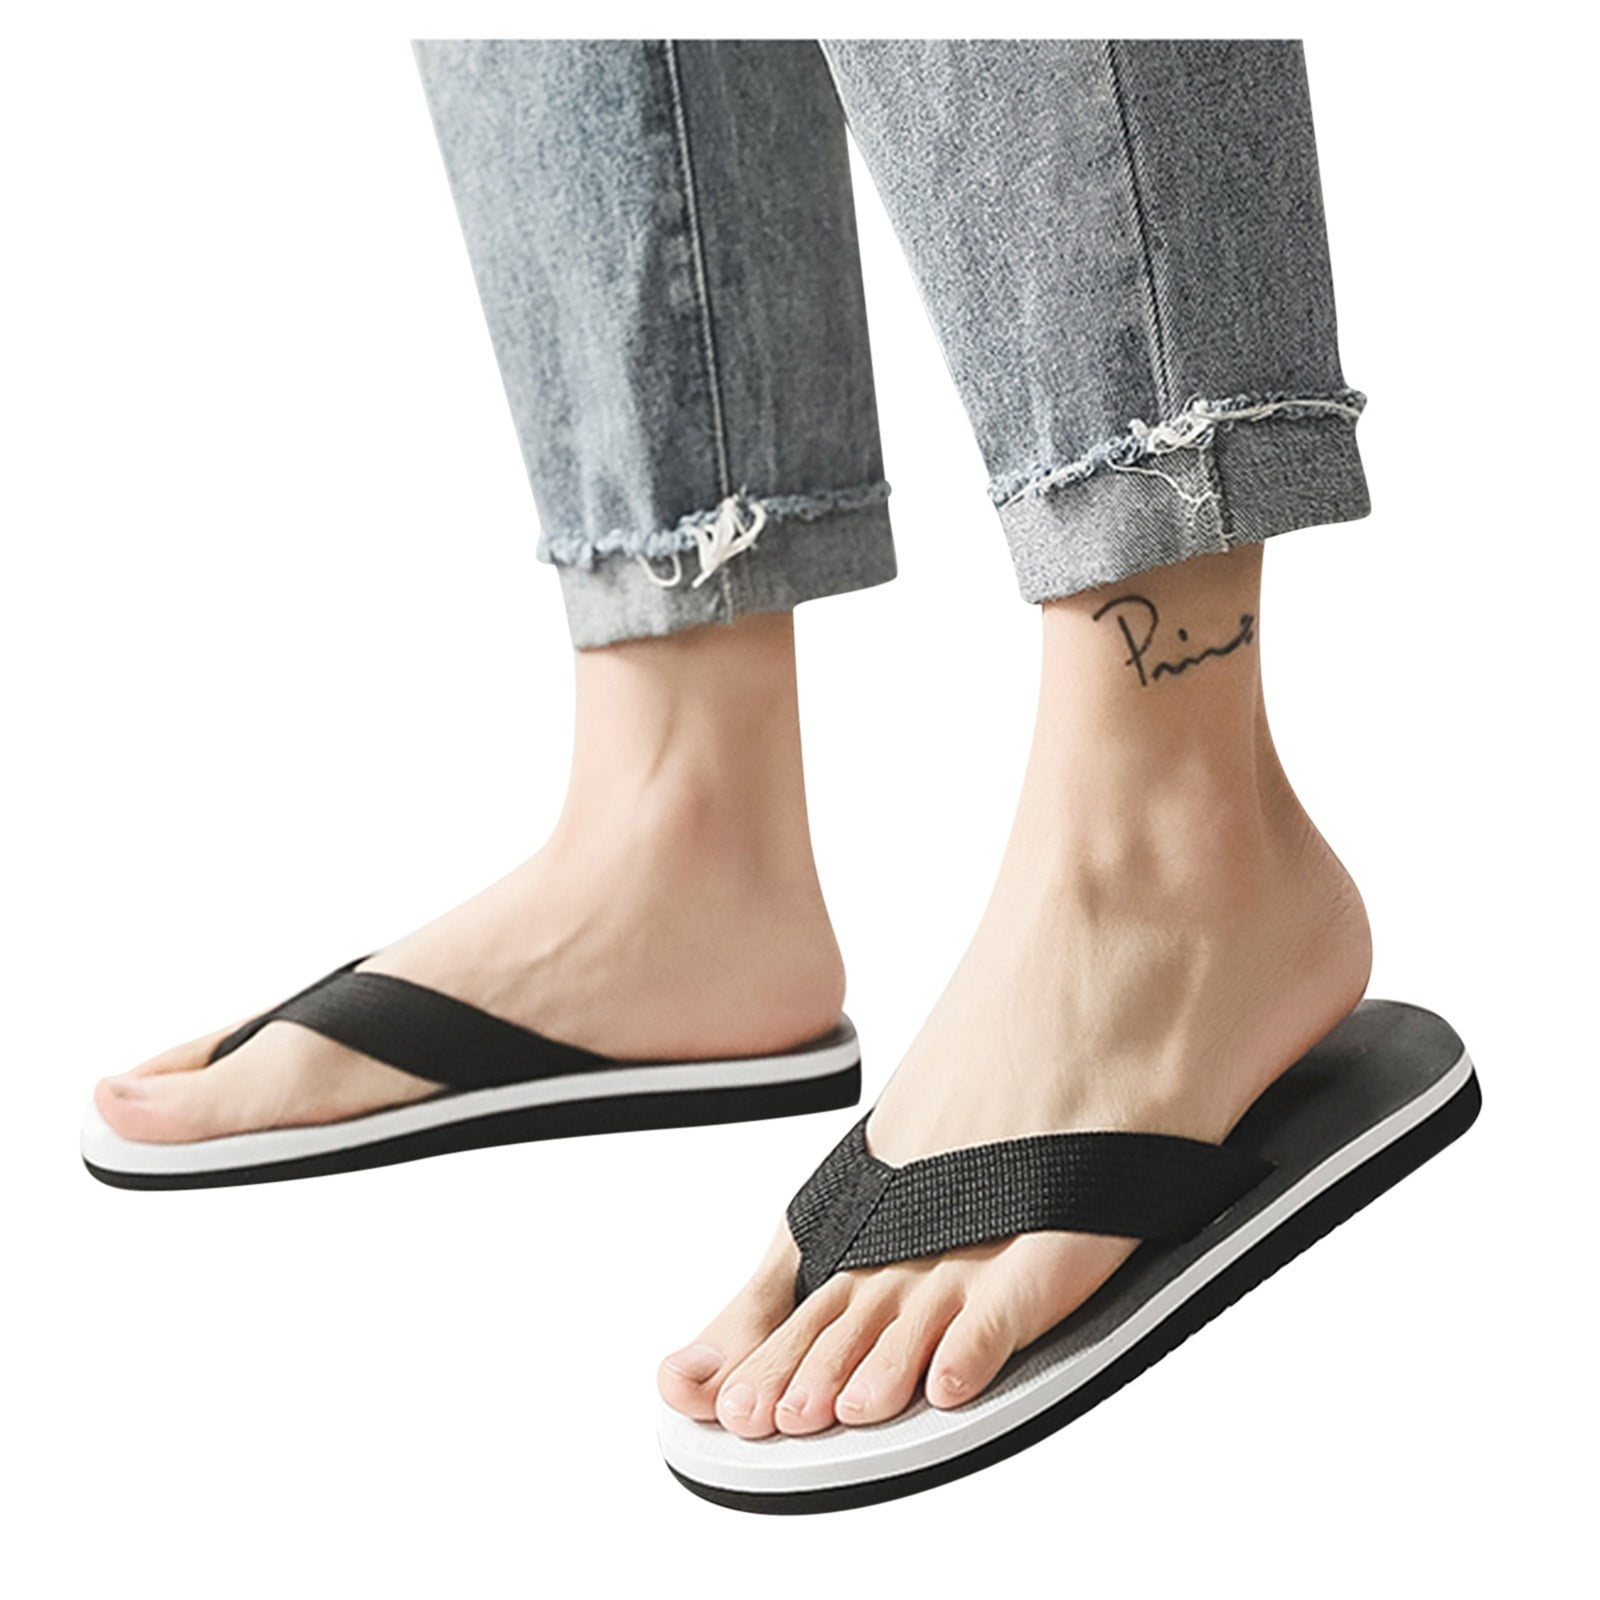 Yoga Mat Flip Flops For Men And Women With Arch Support Slip On Summer  Beach Thong Sandals